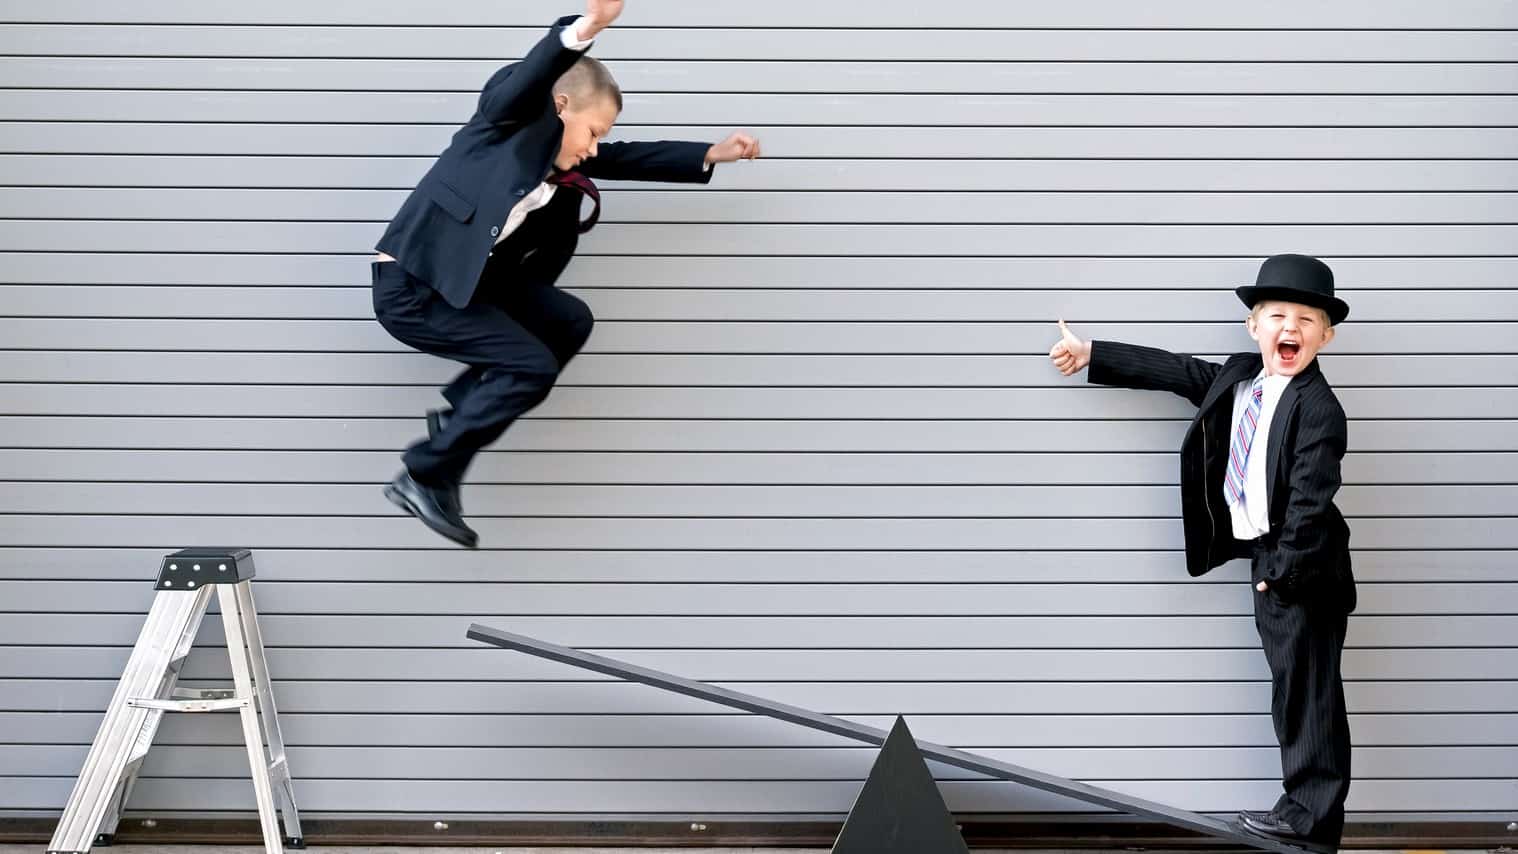 one young boy jumps off a step ladder and is captured mid-air about to land on a seesaw where his friend is standing with a wide smile on his face looking at the camera and holding his thumbs up as though he is excited for the ride to come. Both young boys are wearing business suits.